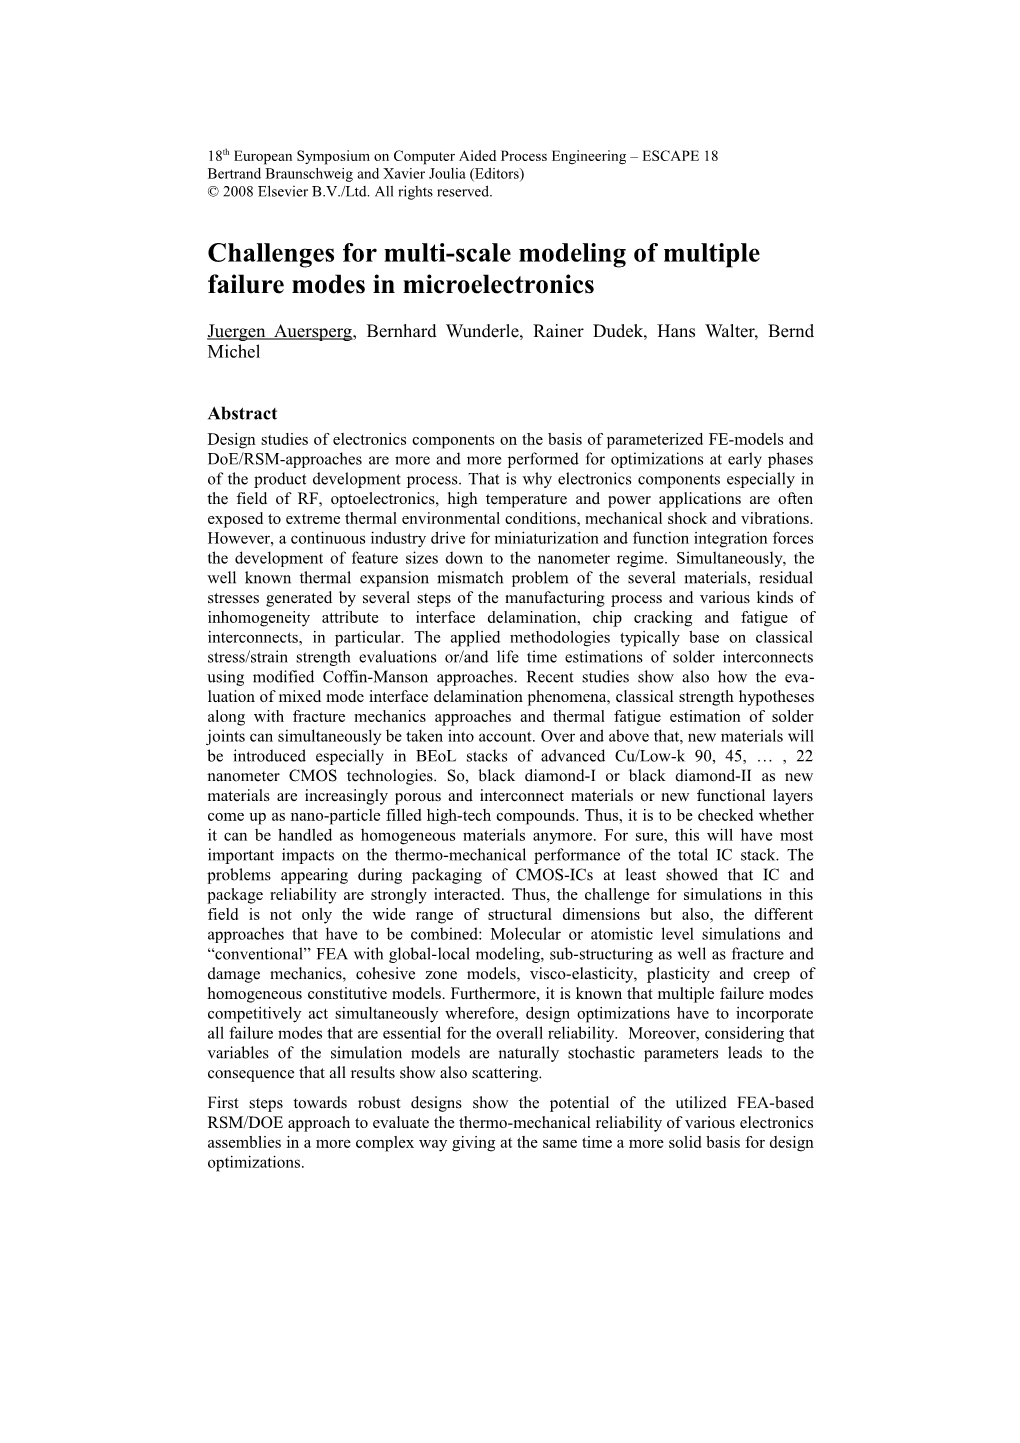 Challenges for Multi-Scale Modeling of Multiple Failure Modes in Microelectronics